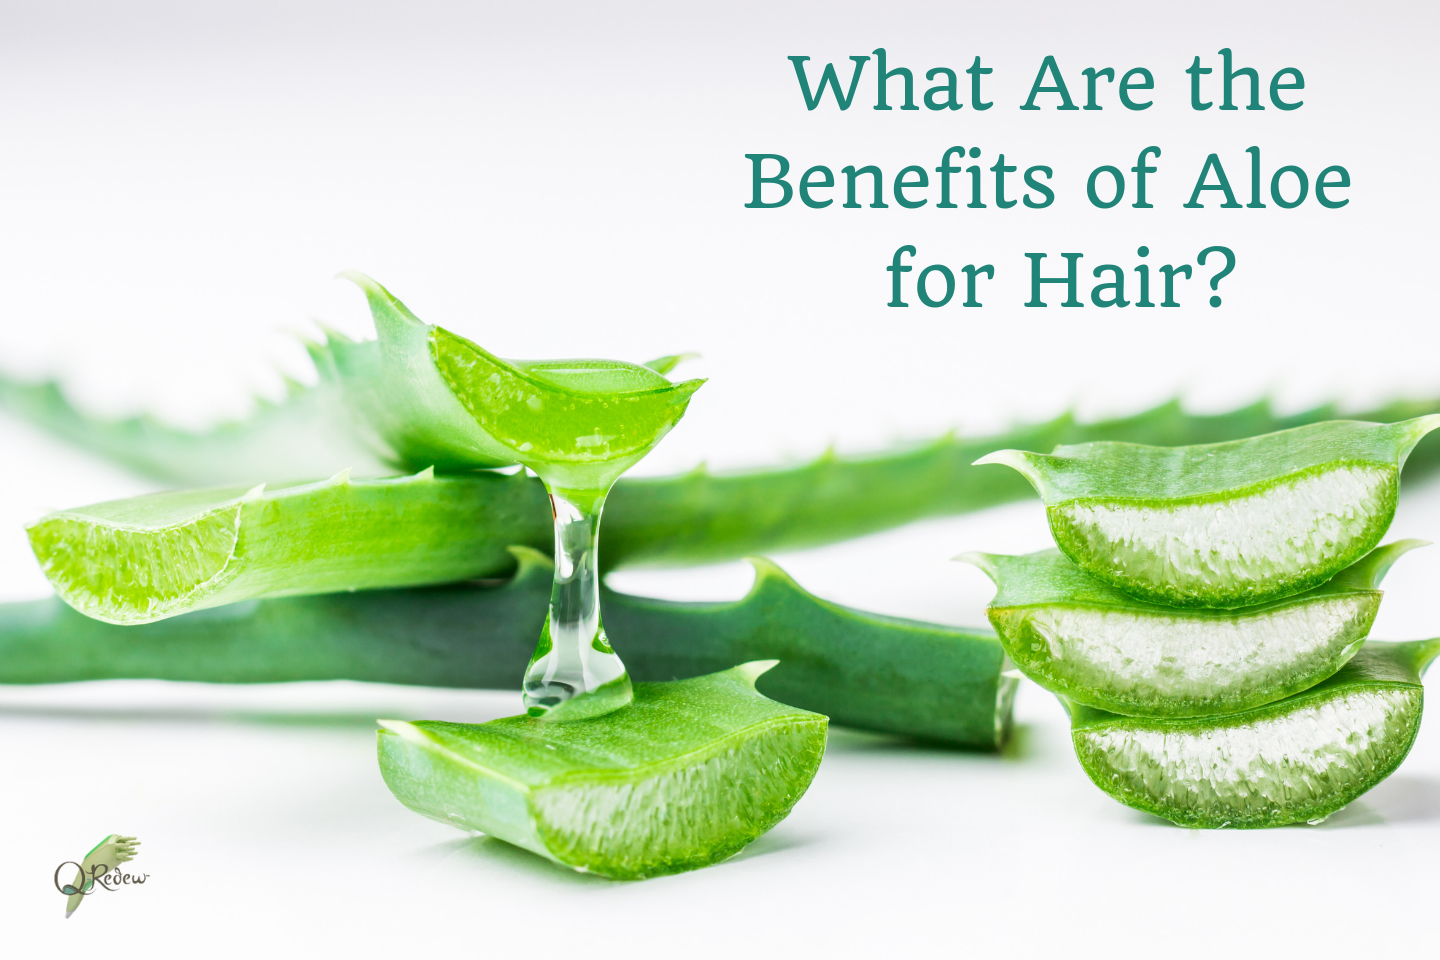 What Are the Benefits of Aloe Vera for Hair?